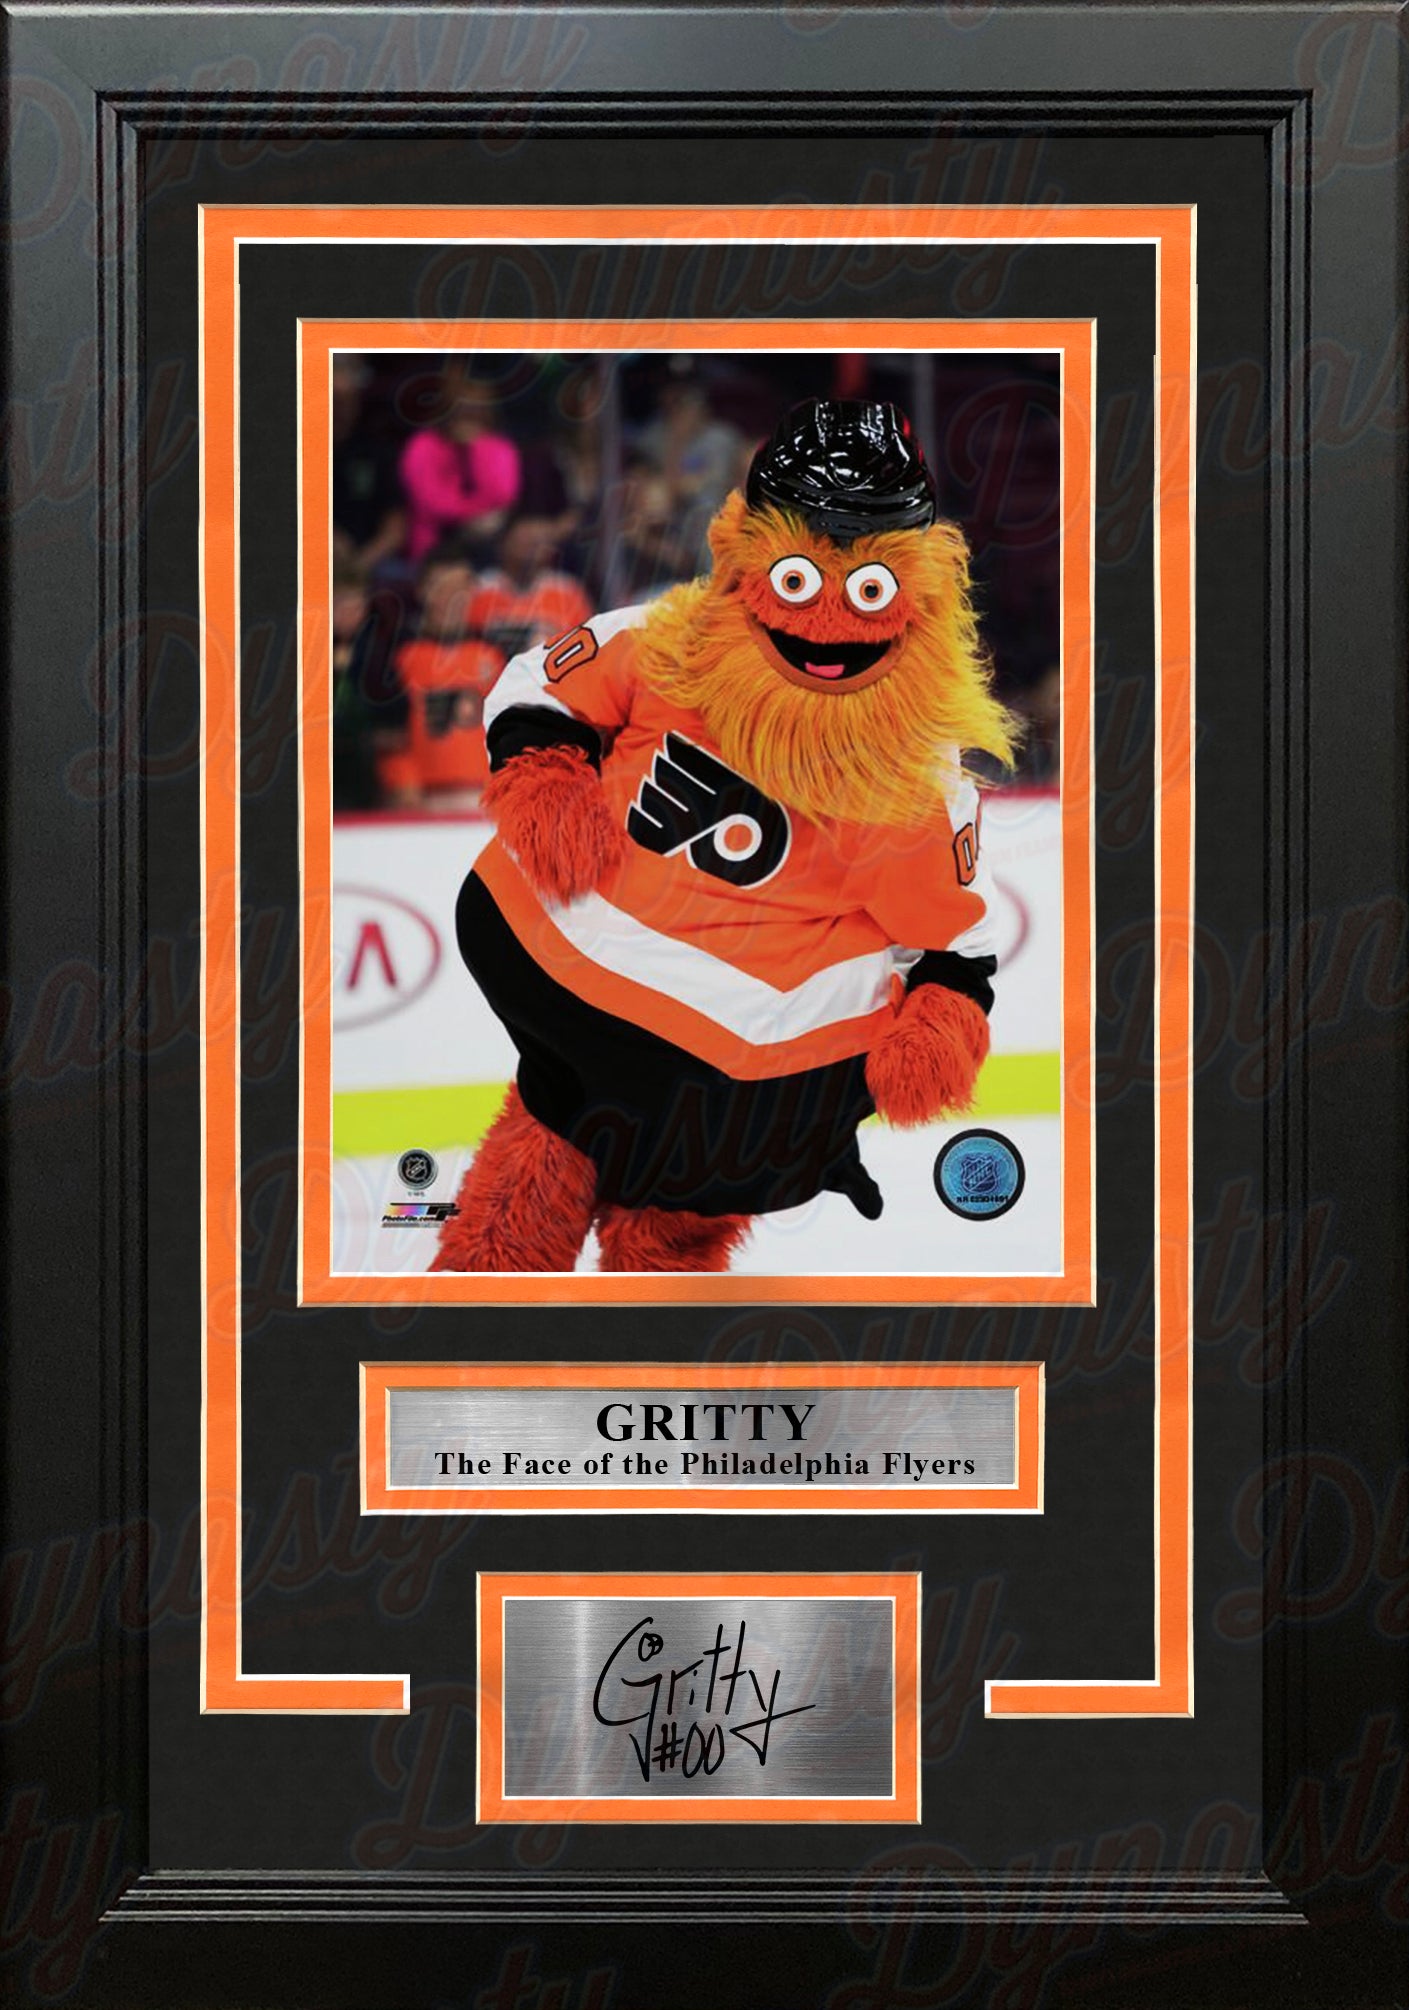 Gritty Philadelphia Flyers 8" x 10" Framed Hockey Mascot Photo with Engraved Autograph - Dynasty Sports & Framing 